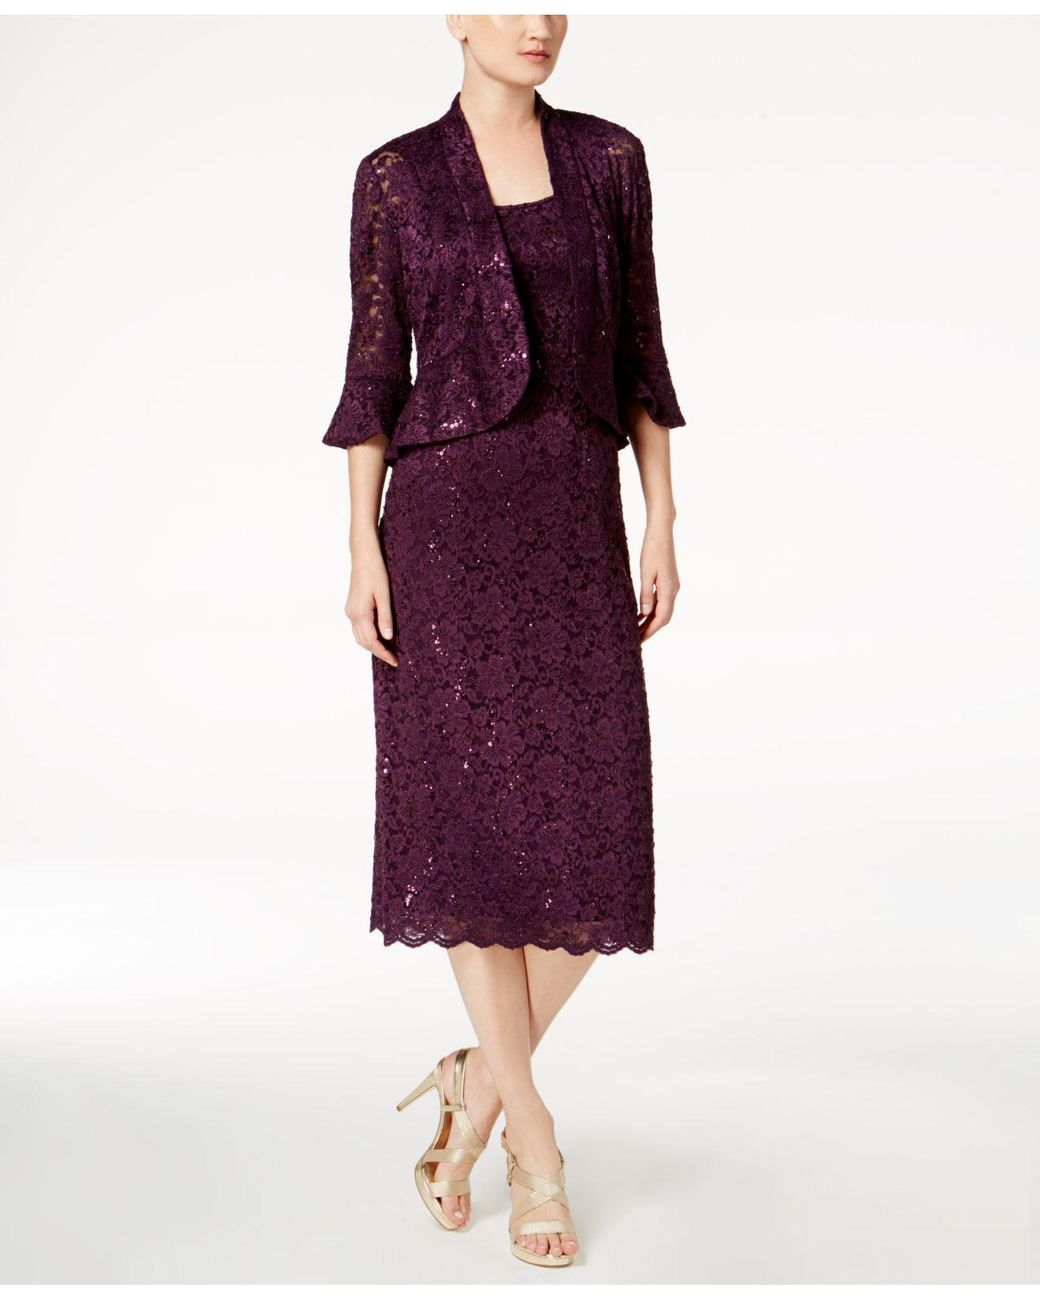 R & M Richards Sequined Lace Midi Dress And Jacket in Plum (Purple) - Lyst